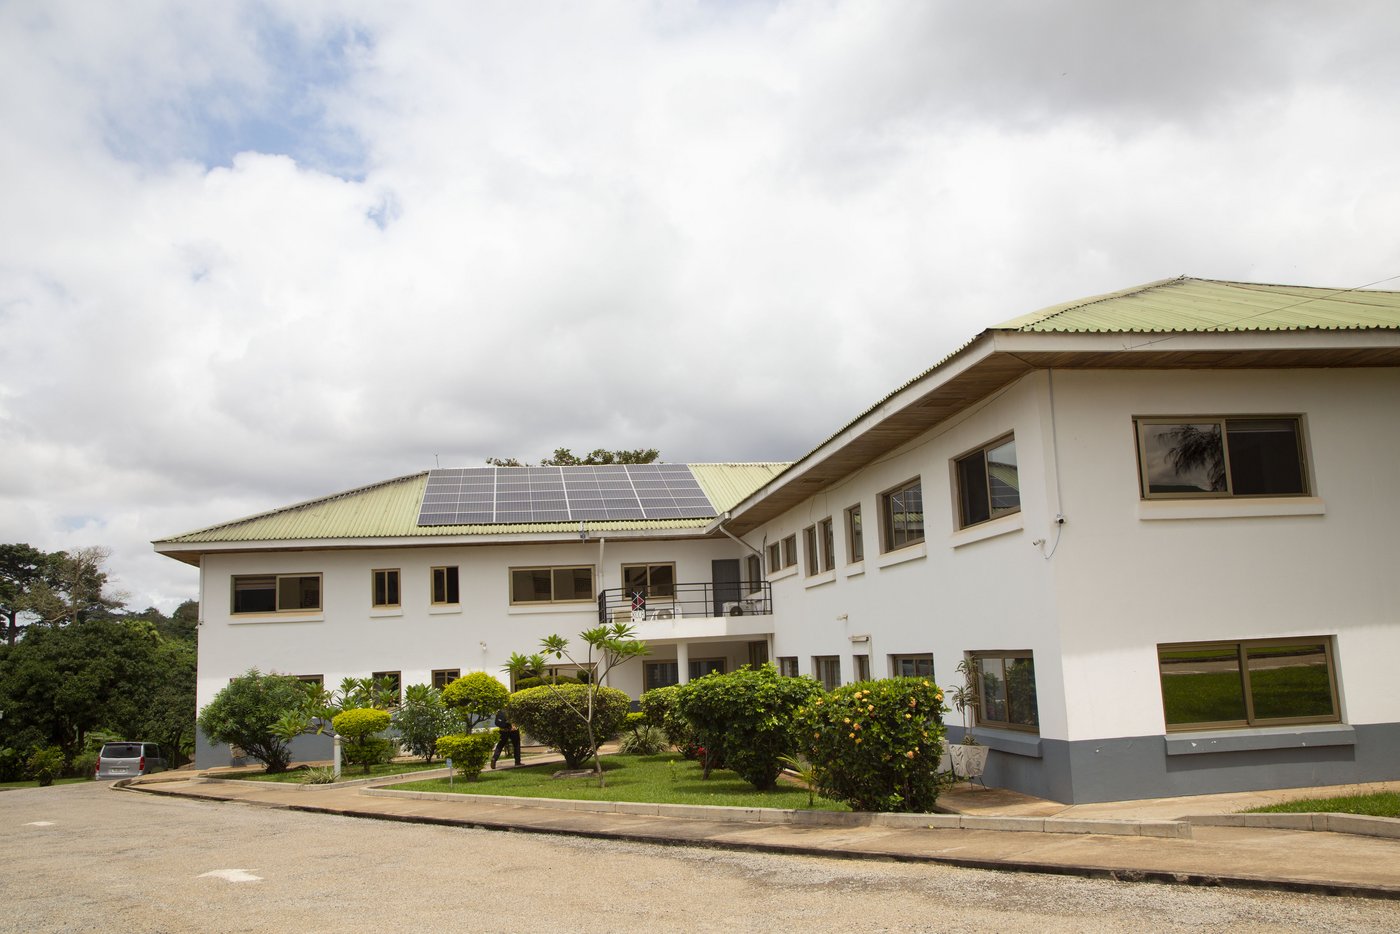 The picture shows the two-storey main building of the KCCR with light green roof and solar system.